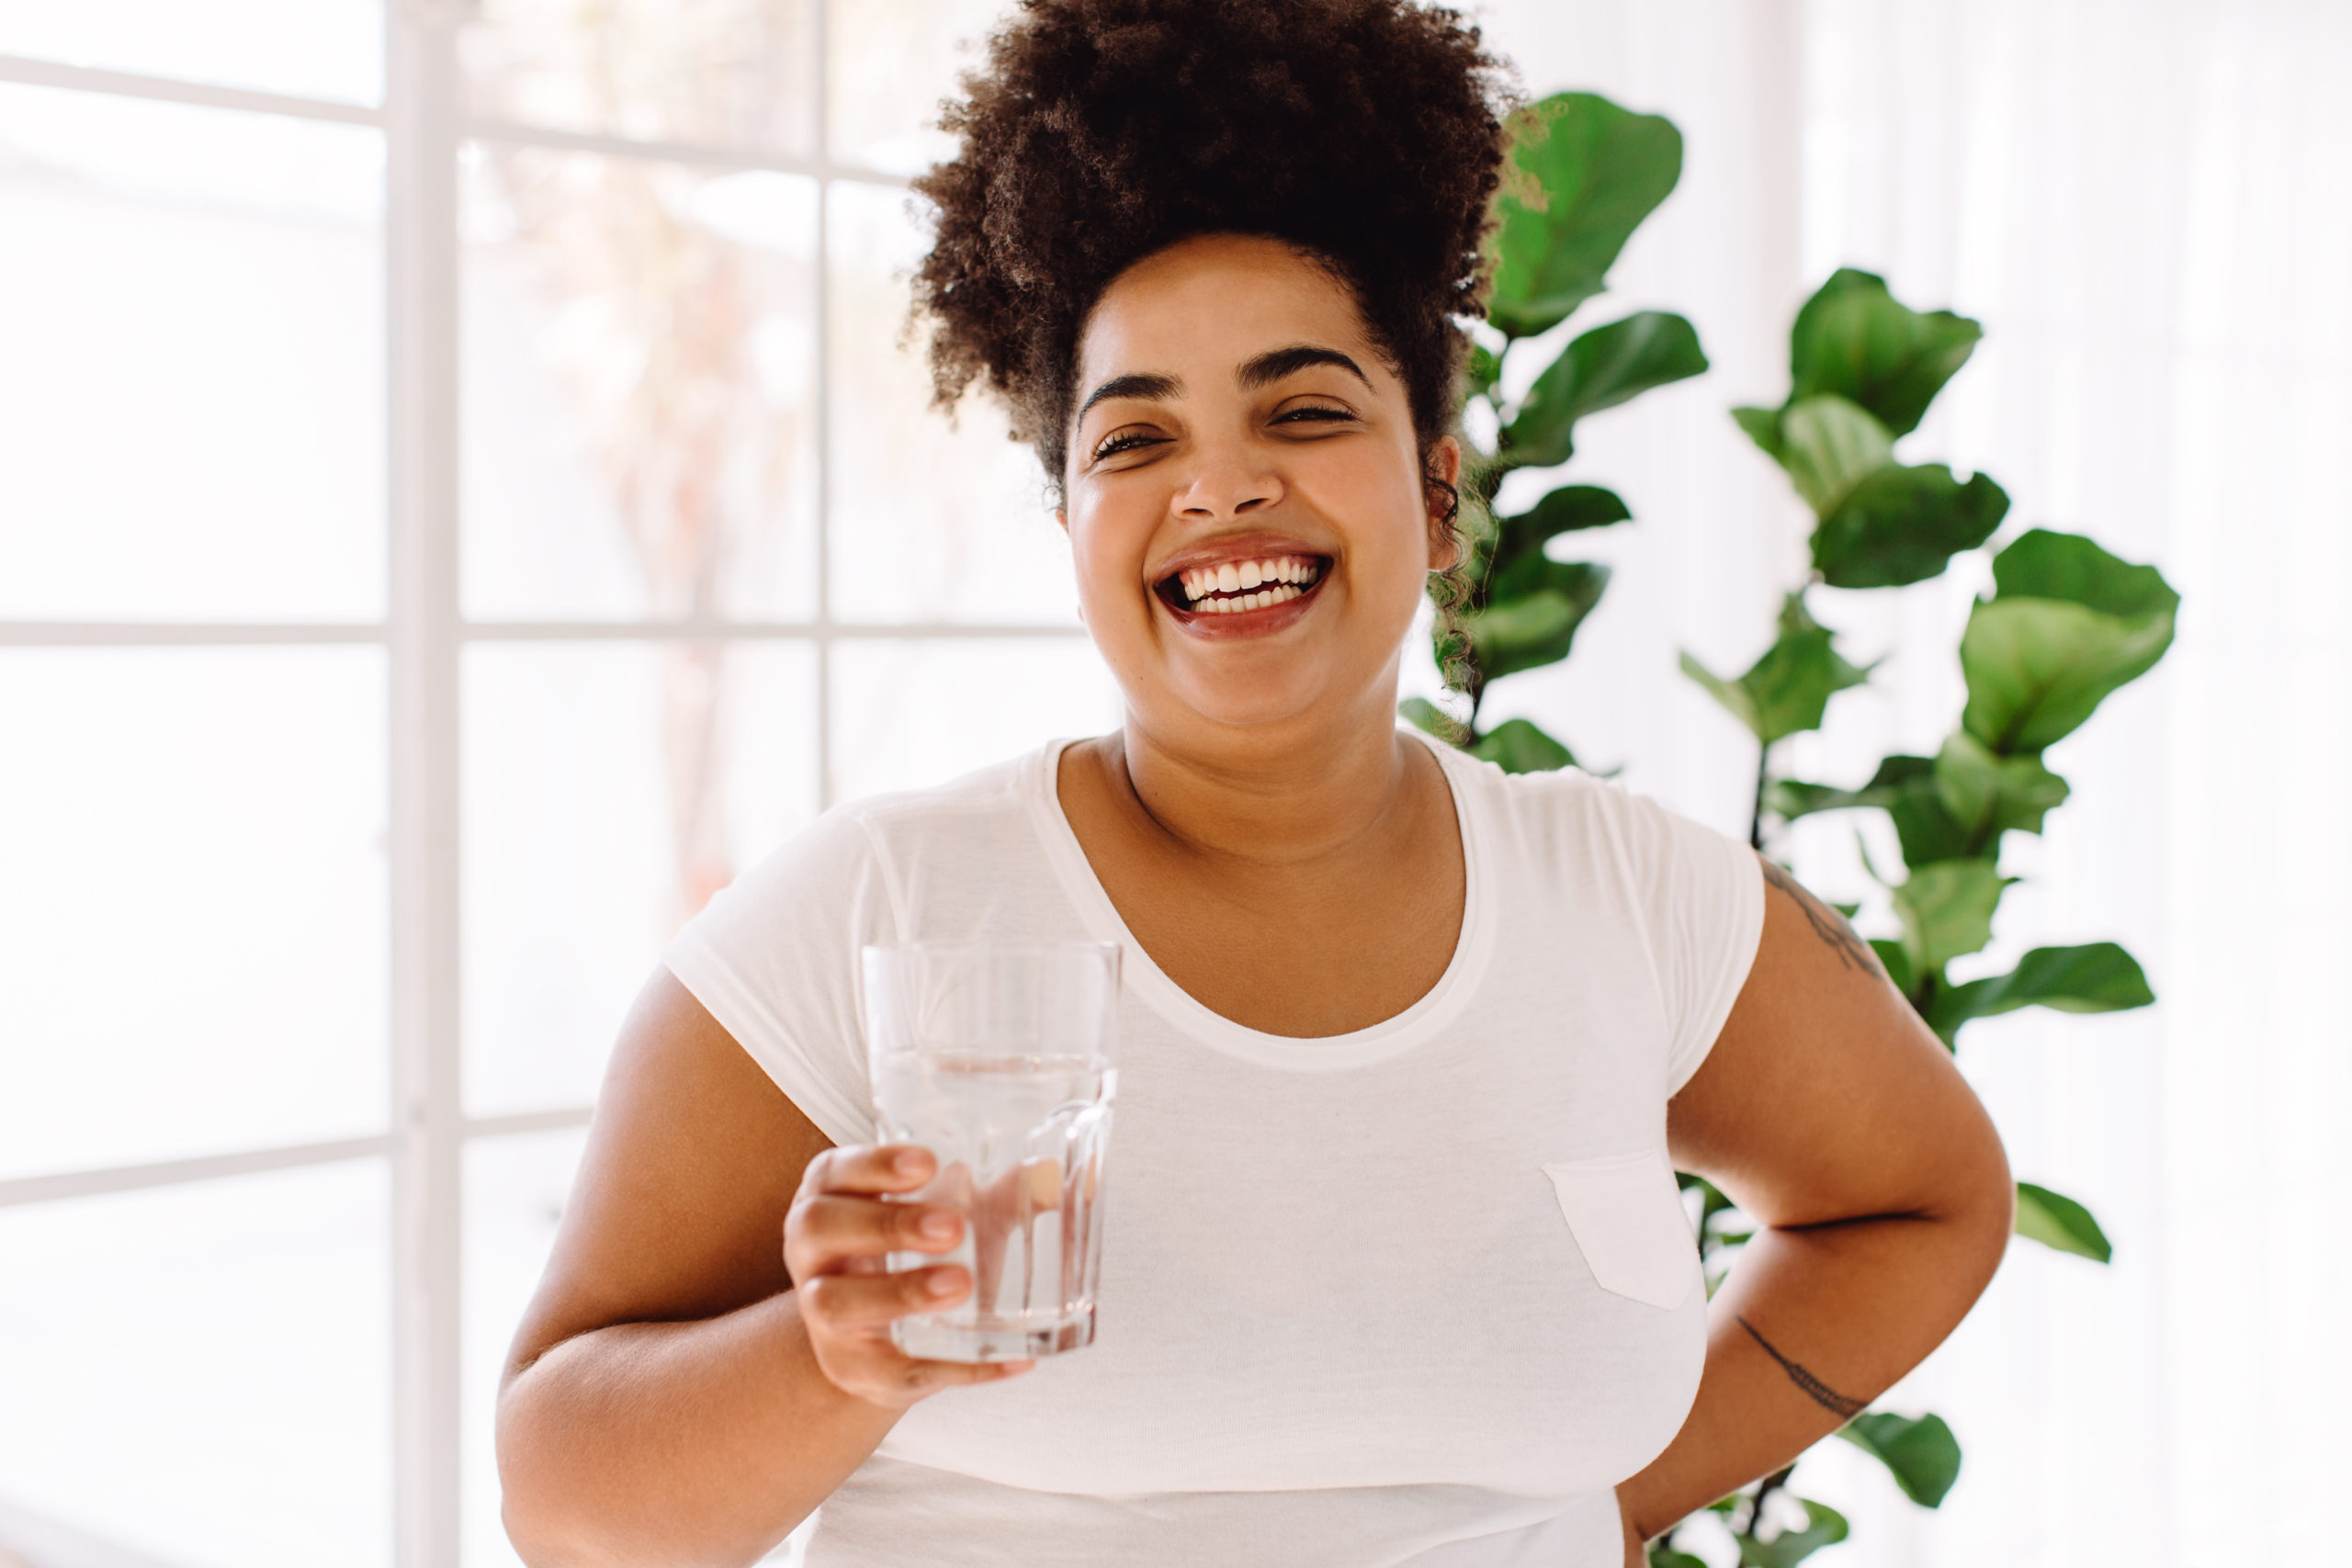 a bariatric patient drinks water and smiles while preparing for weight loss surgery